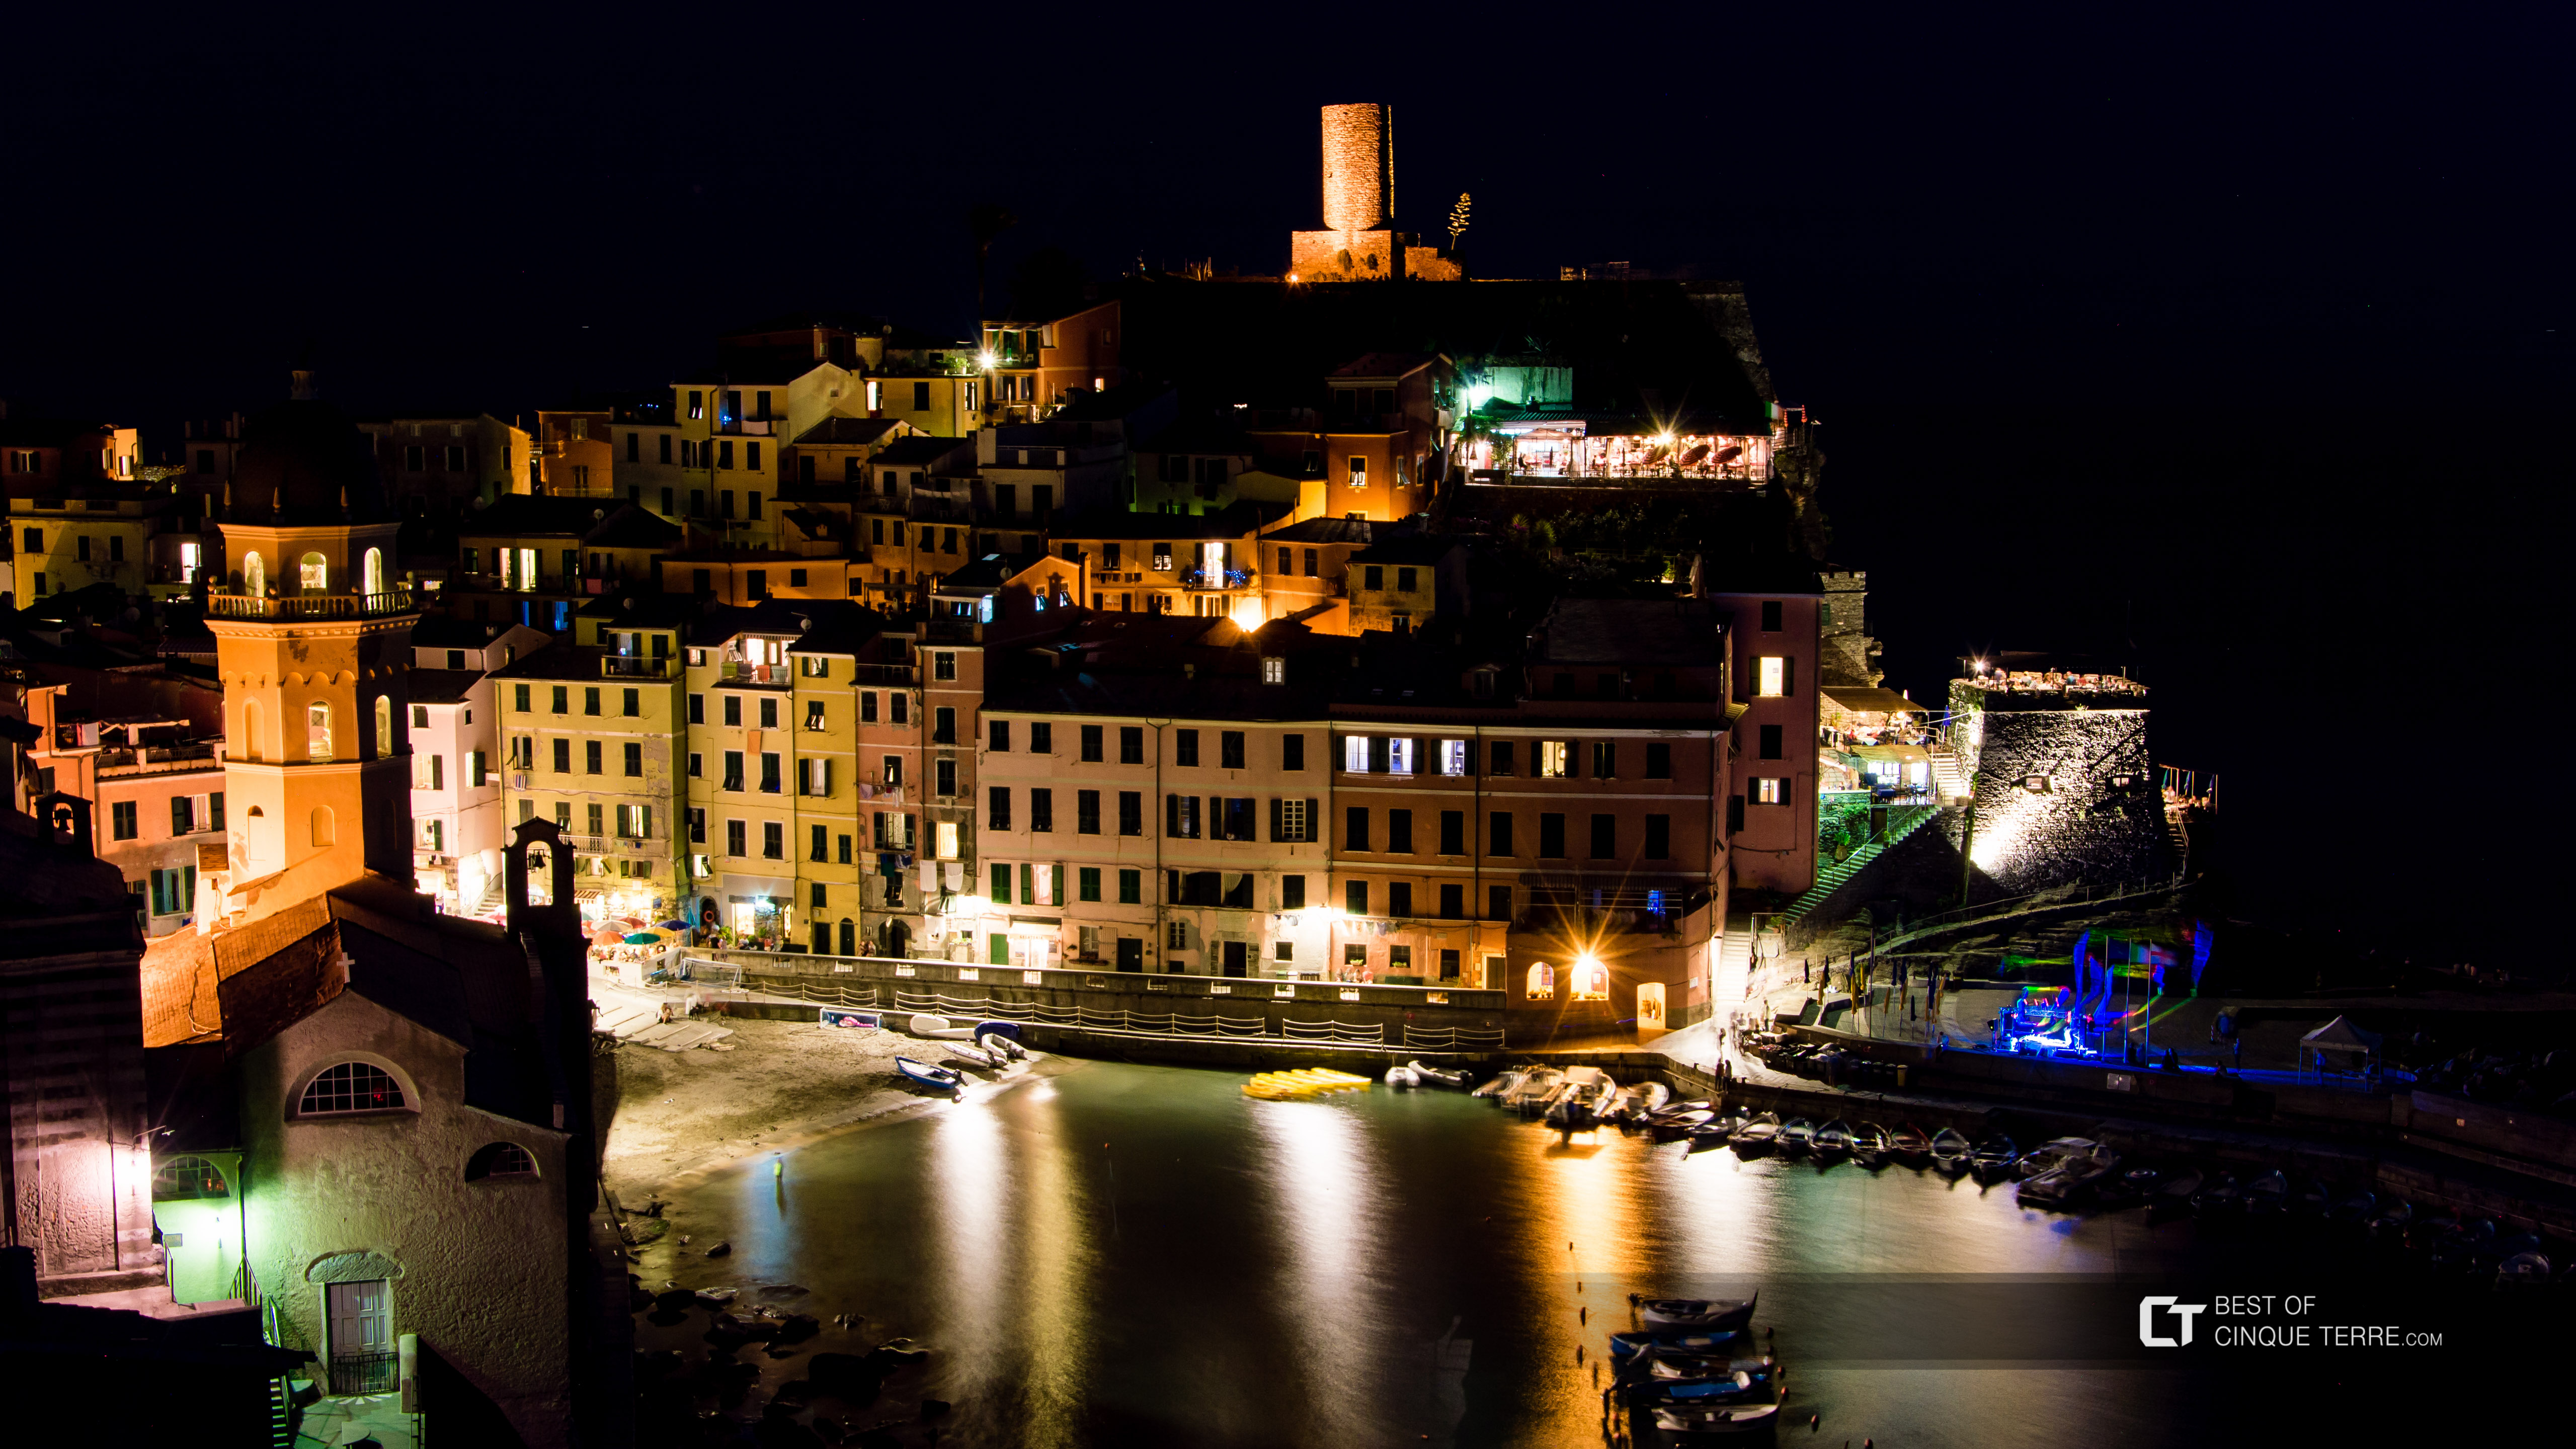 View of the bay by night, Vernazza, Cinque Terre, Italy